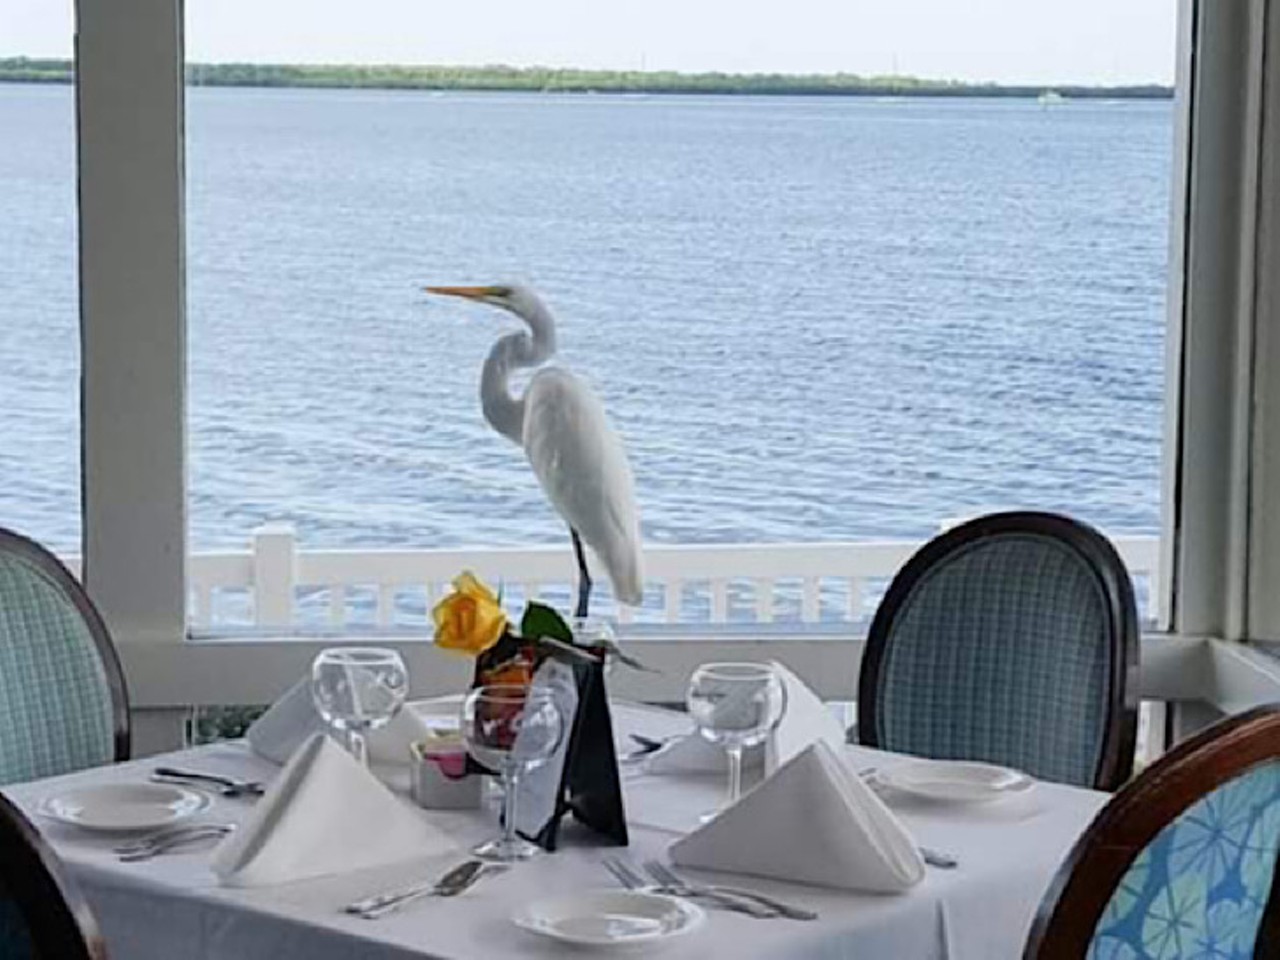 Bon Appetit
148 Marina Plaza, Dunedin, FL
The waterfront bar attached to the restaurant Bon Appetit features live entertainment Thursday through Sunday and a happy hour that goes from 11:30 a.m. to 6 p.m. Although this bar is a hit for Dunedin residents, its a hidden gem for the rest of Tampa Bay.
Photo via Bon Appetit/Facebook